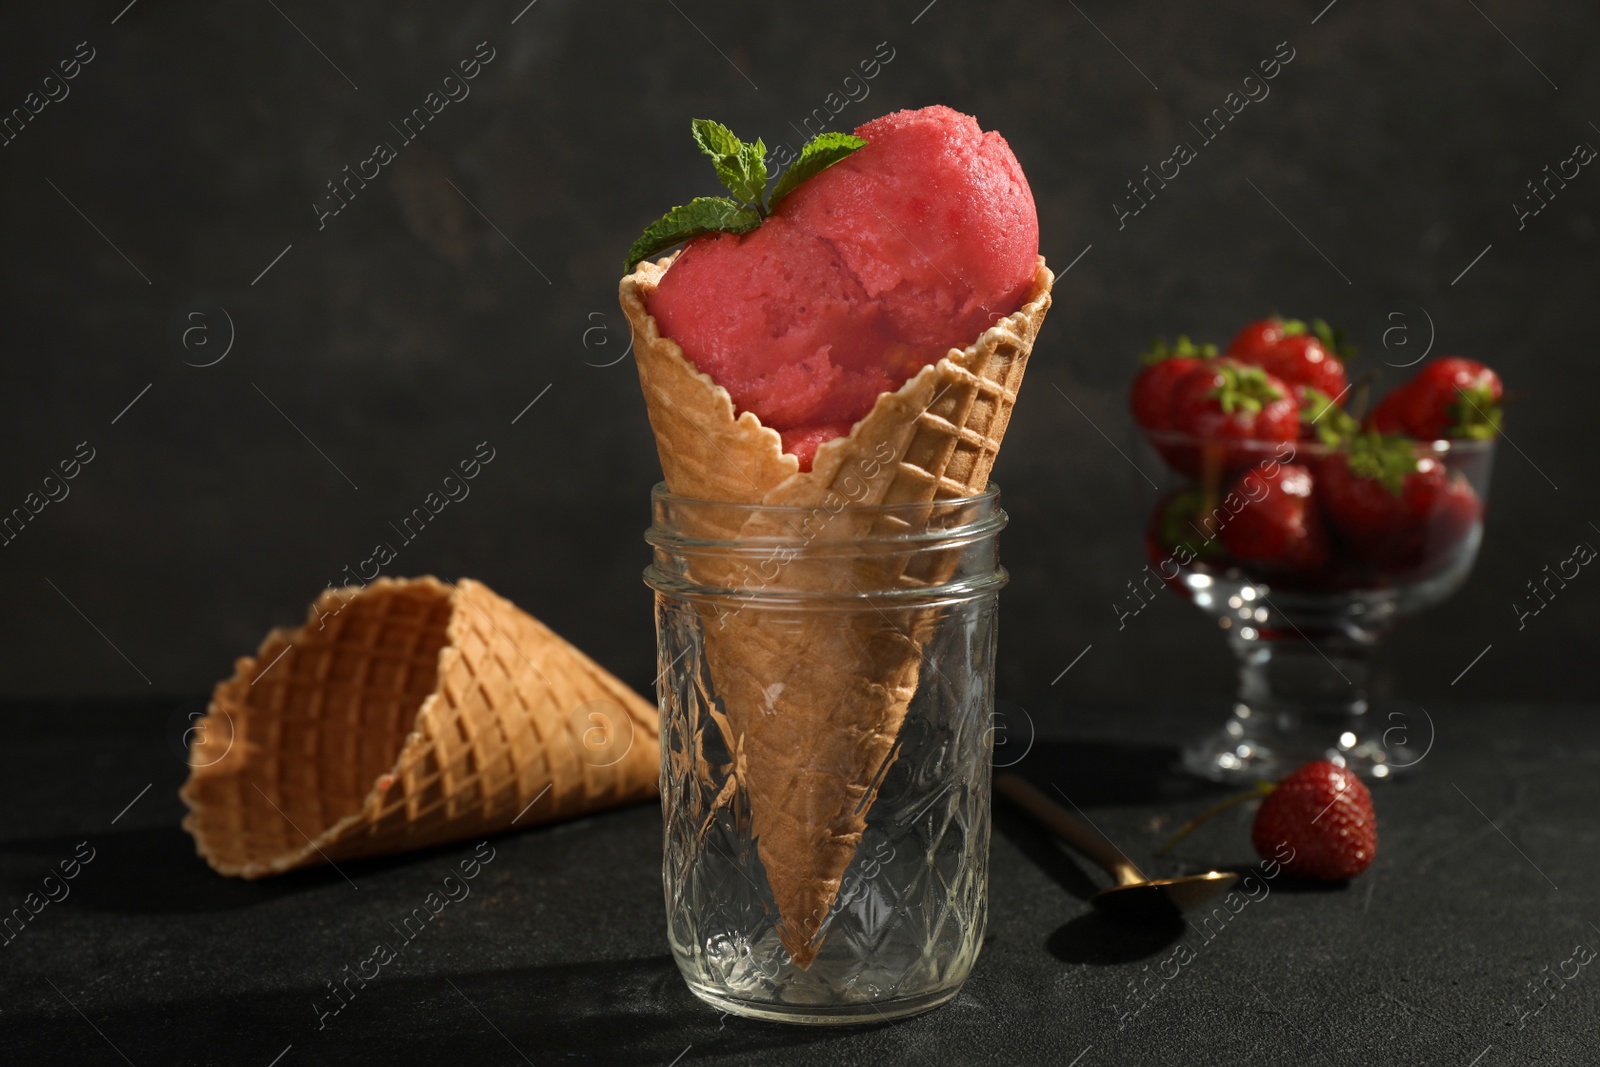 Photo of Delicious strawberry ice cream in wafer cone served on black table